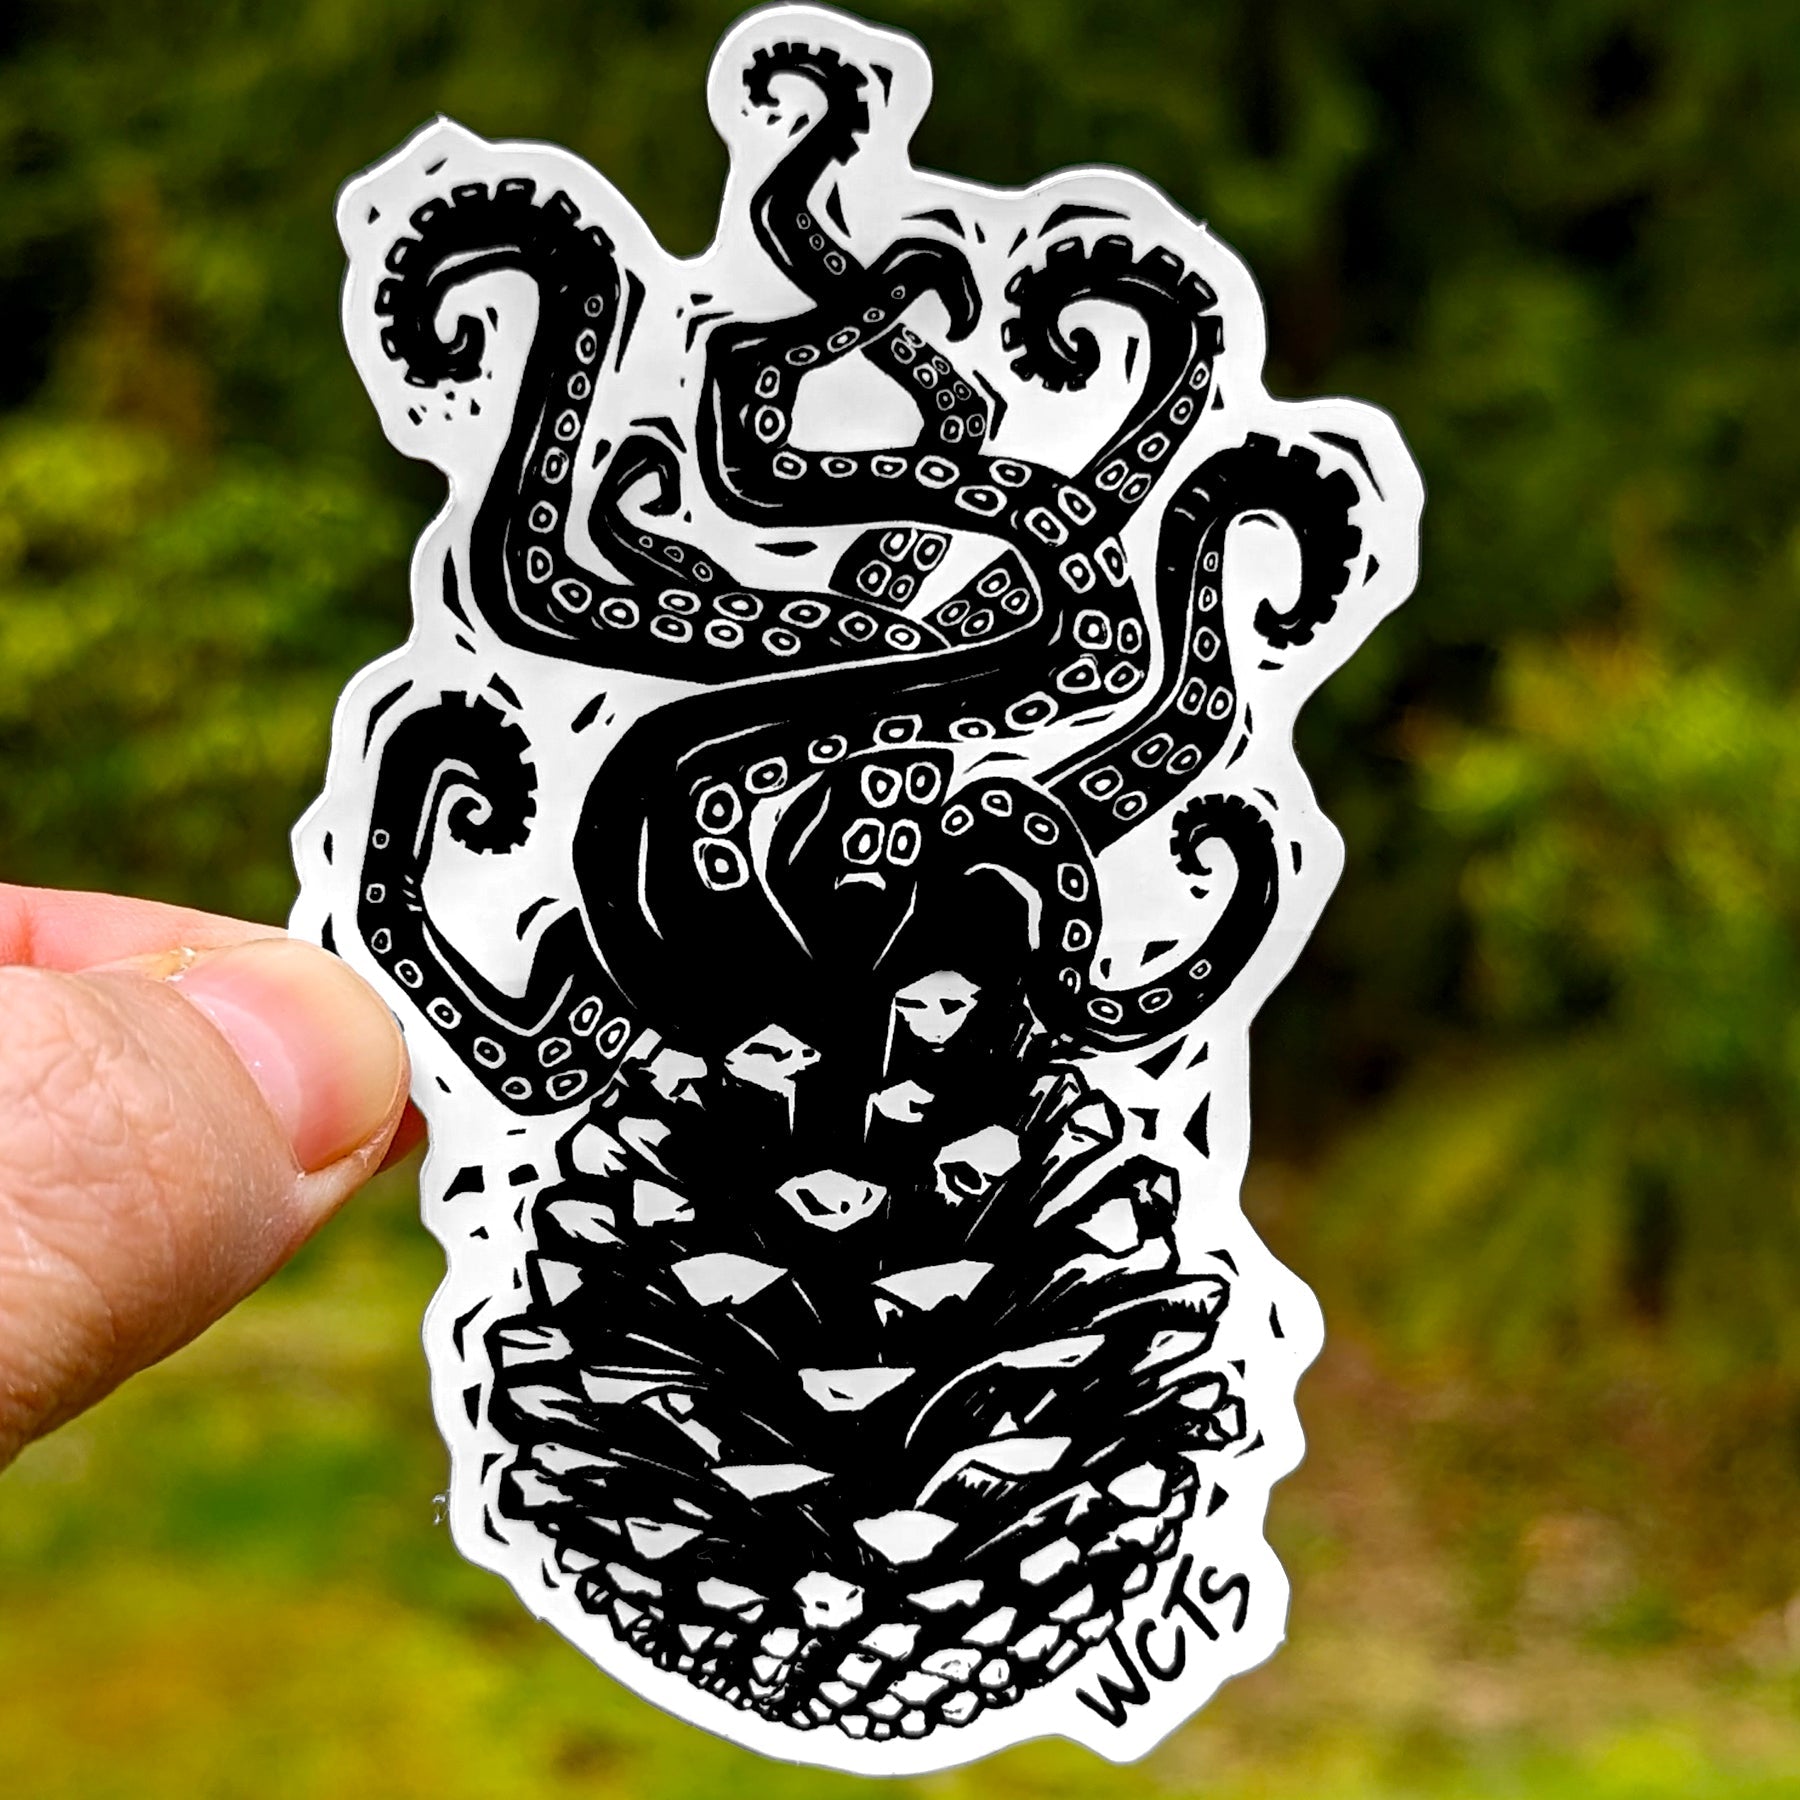 Westcoastees Pine Cone Octopus Sticker - Westcoastees Pine Cone Octopus Sticker -  - House of Himwitsa Native Art Gallery and Gifts